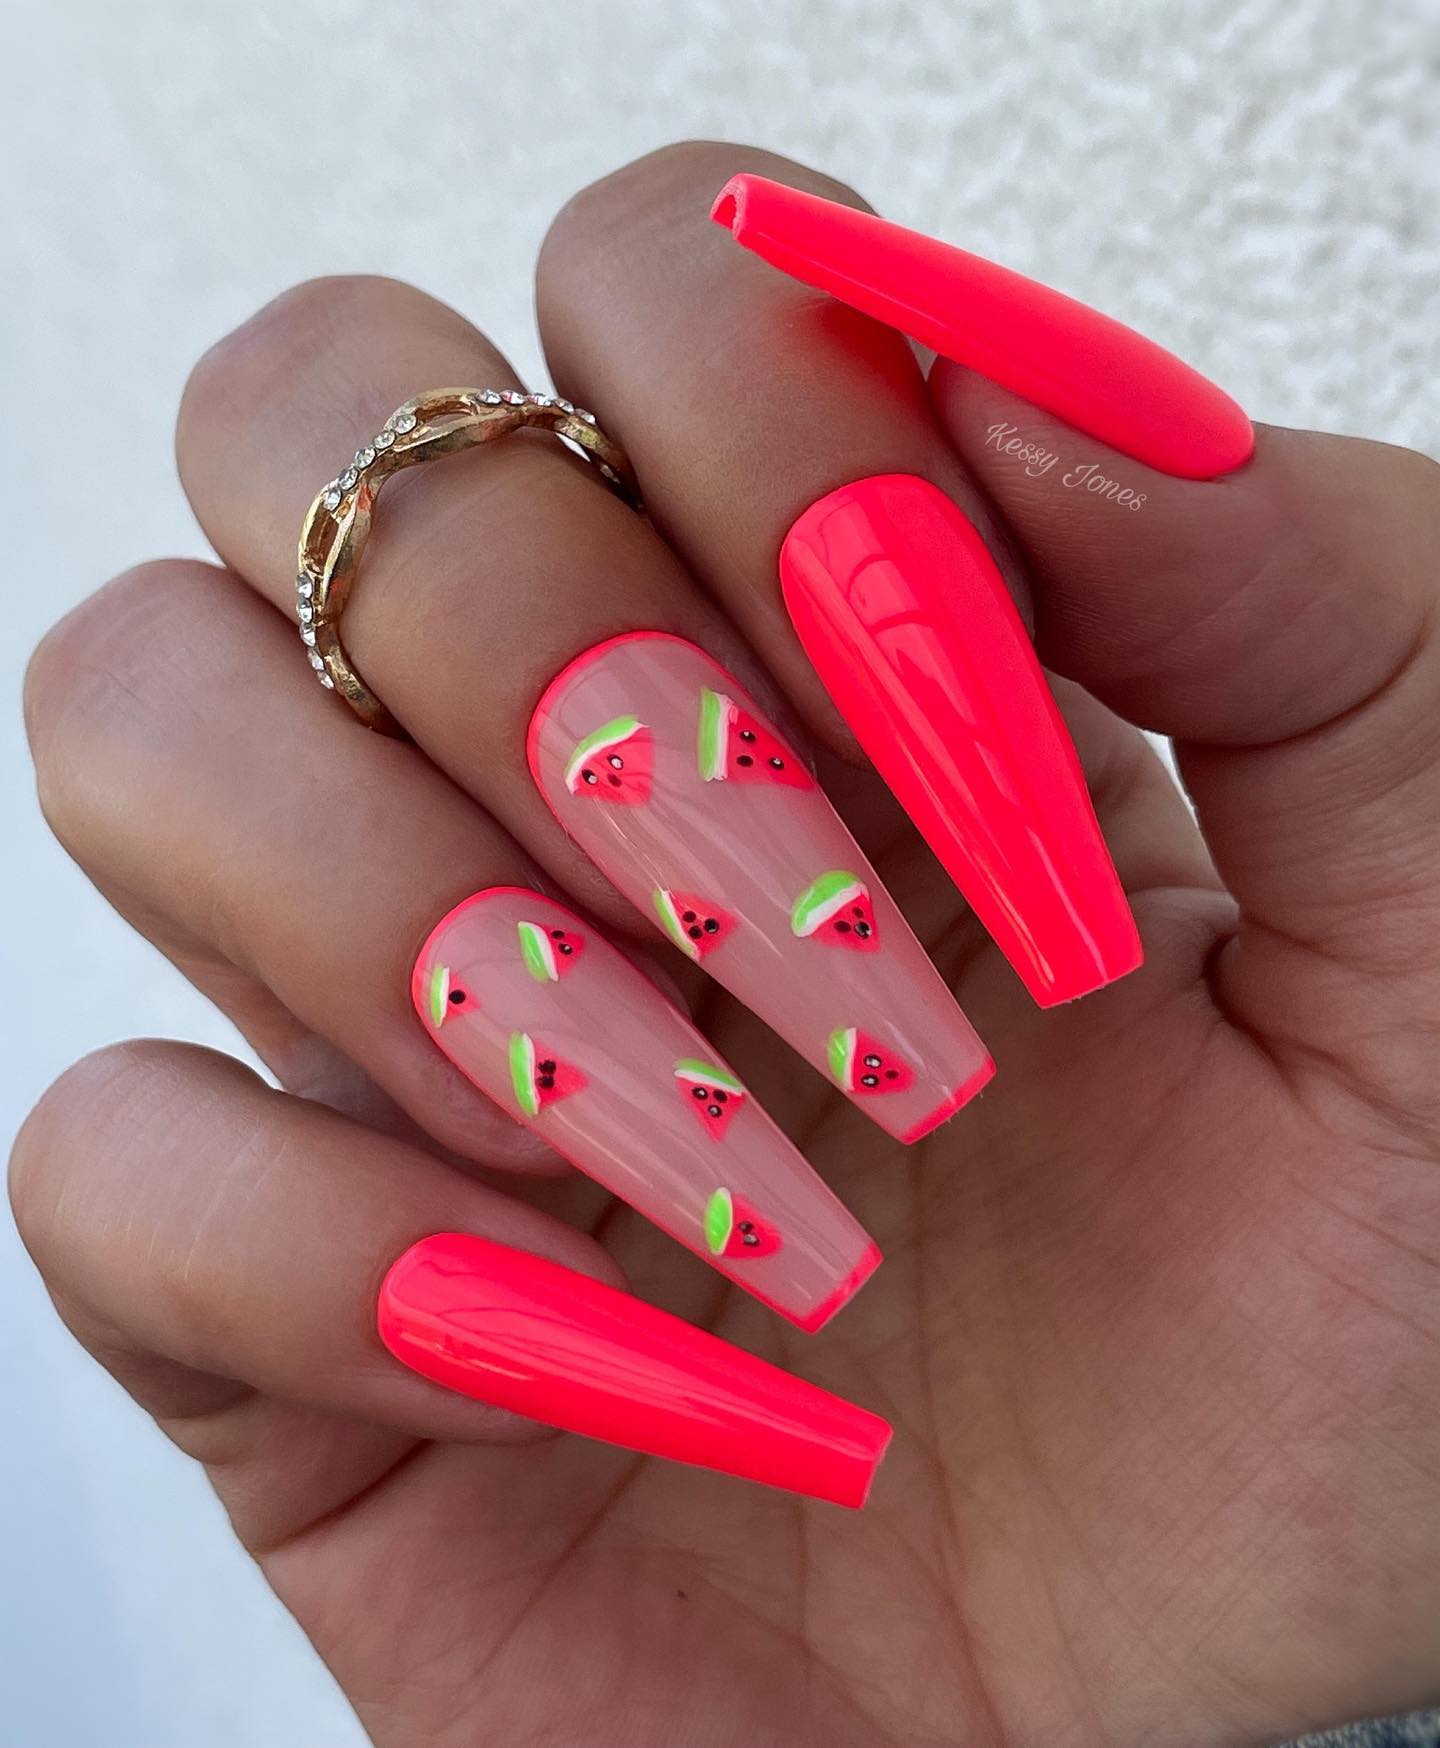 Watermelon nail art is a great way to show your love for the summer. Watermelons are popular right now, so this is a great way to get in on the trend with long ballerina nails!